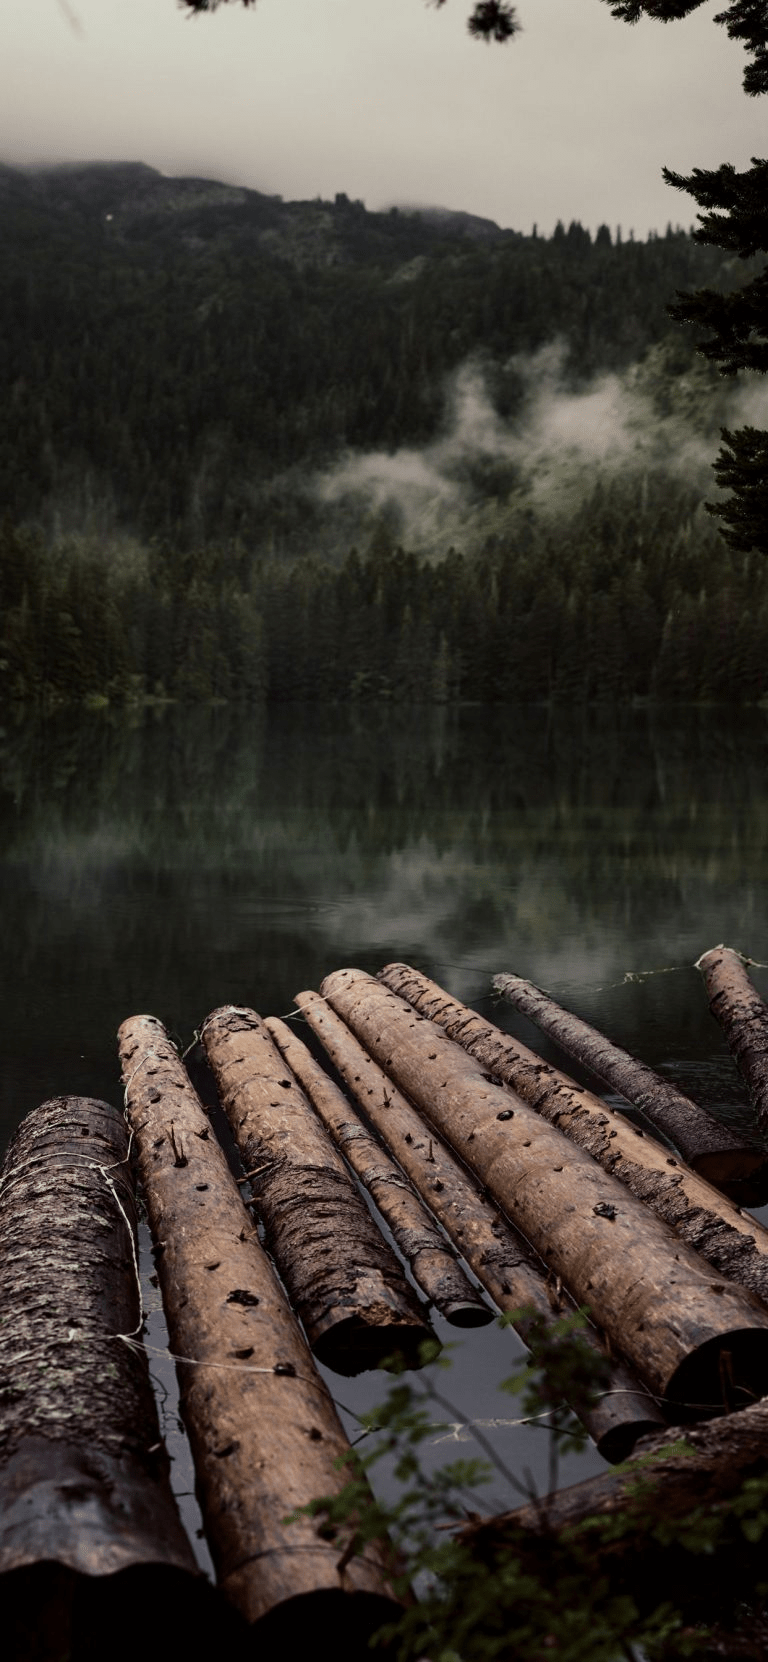 A log sits in the water of a lake. - Calming